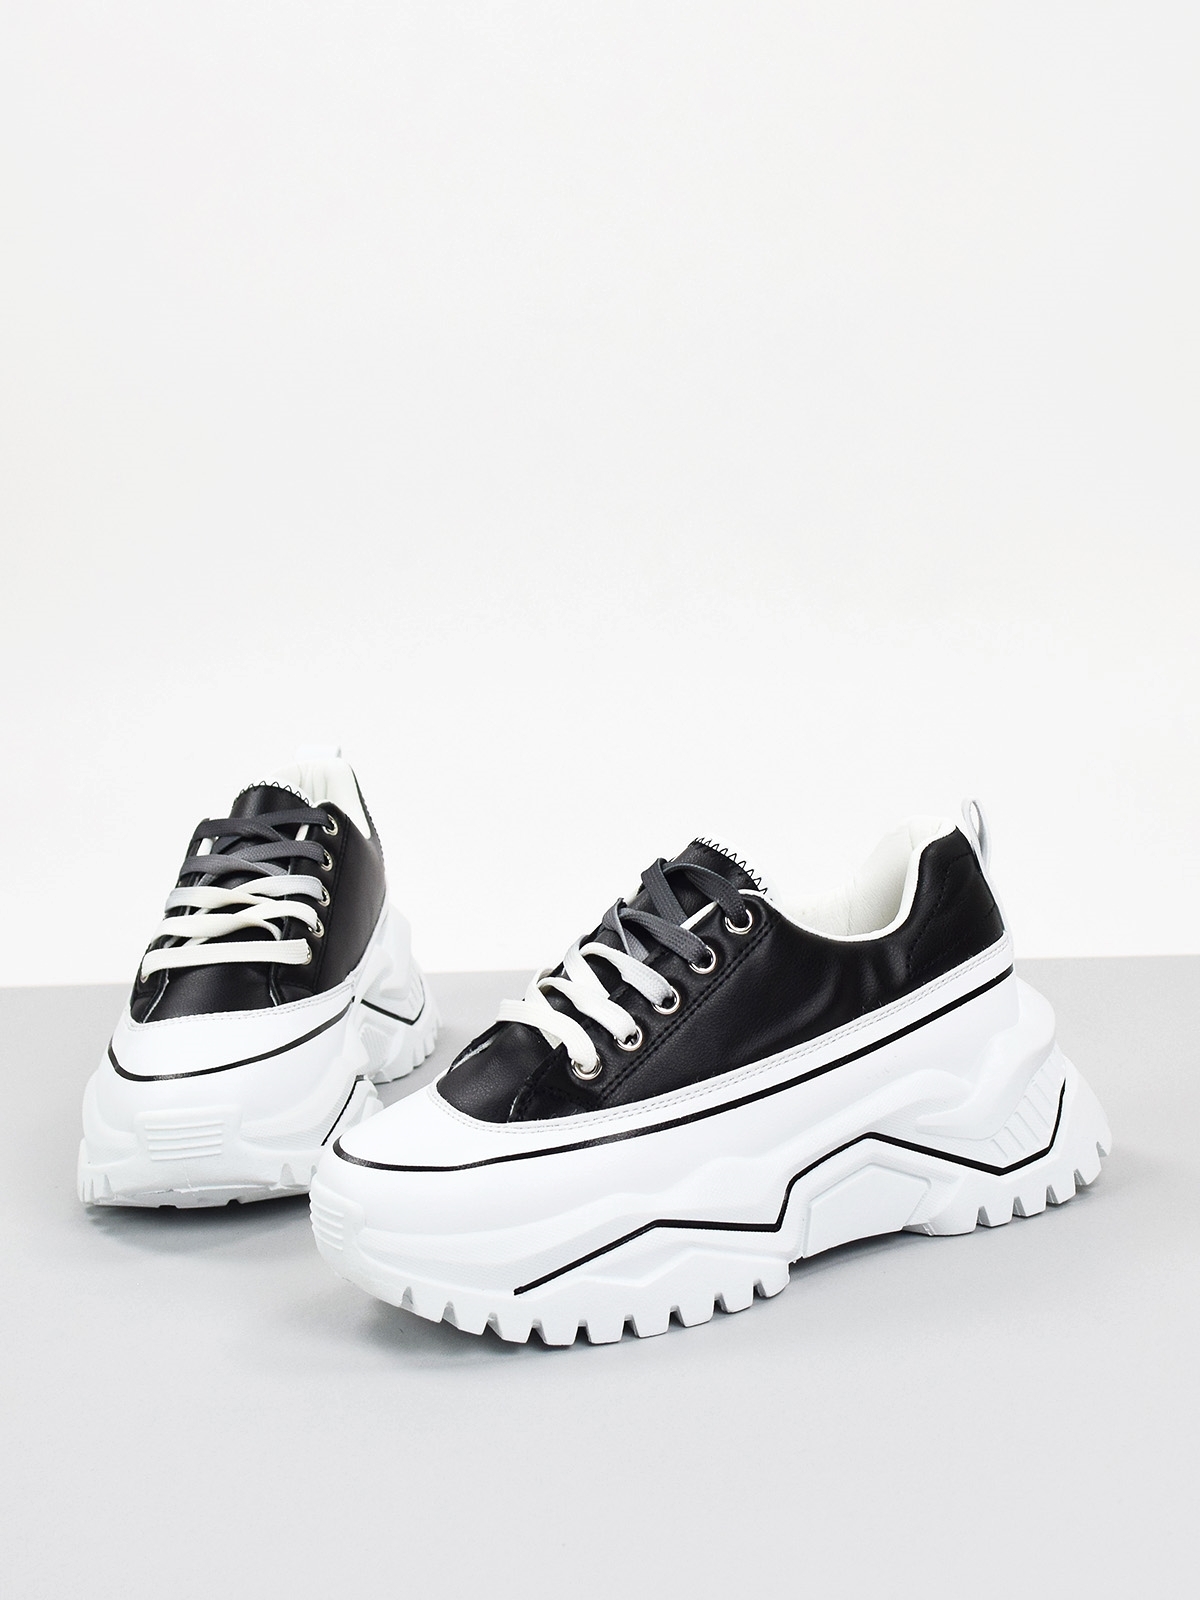 Lace up chunky sole trainers in black